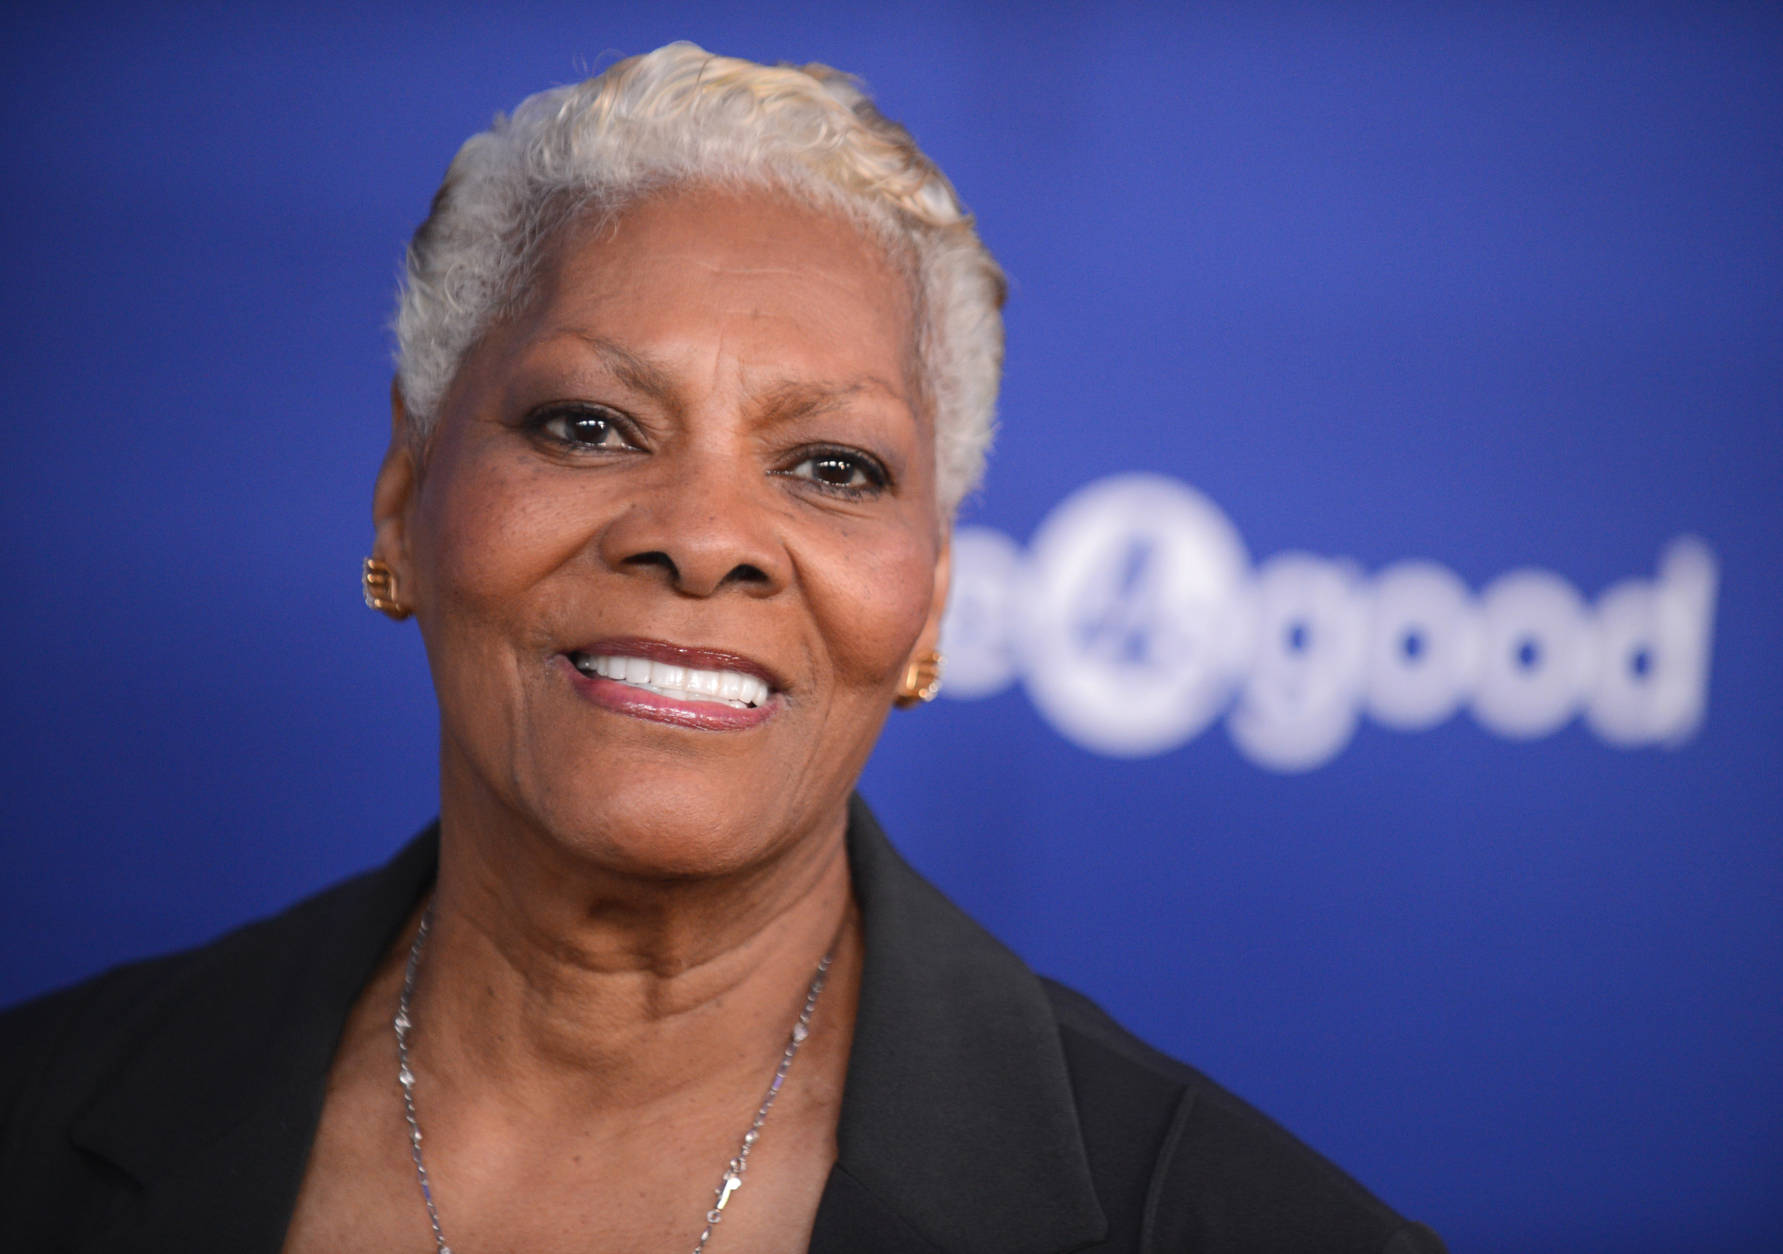 Dionne Warwick arrives at unite4:good and Variety's unite4:humanity at Sony Pictures Studios on Thursday, Feb. 27, 2014, in Culver City, Calif. (Photo by Jordan Strauss/Invision for Bright Future International/AP Images)